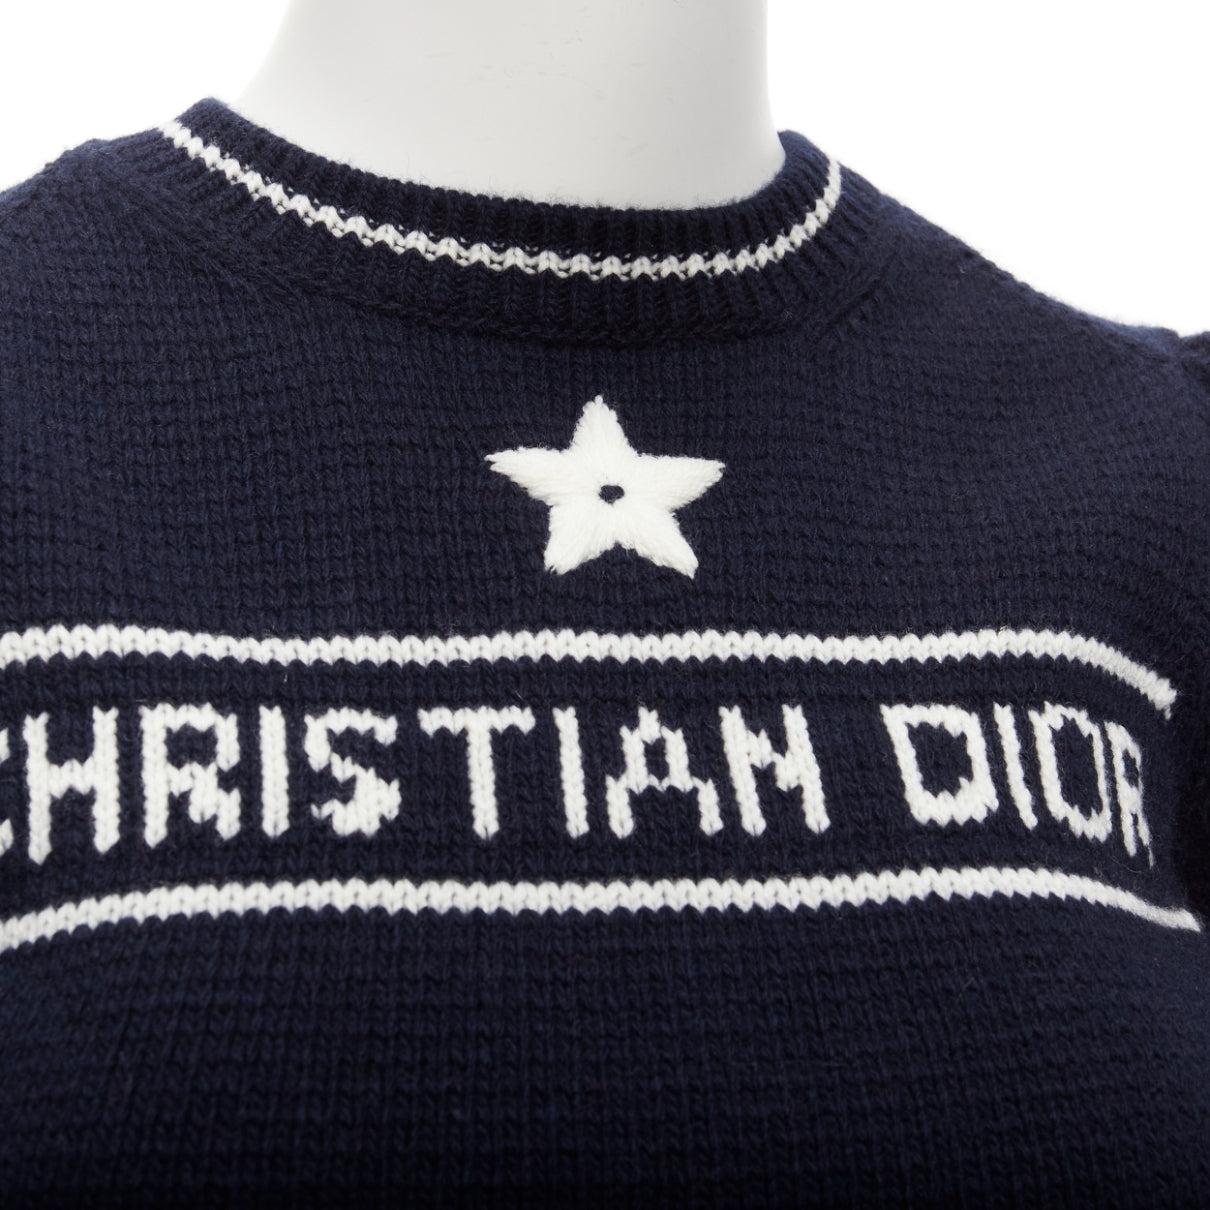 CHRISTIAN DIOR 2022 100% cashmere navy white puff sleeve crew crop sweater FR34 XXS
Référence : AAWC/A00829
Marque : Dior
Créatrice : Maria Grazia Chiuri
Collectional : 2022
MATERIAL : Laine, cachemire
Couleur : Marine, Whiting
Motif :